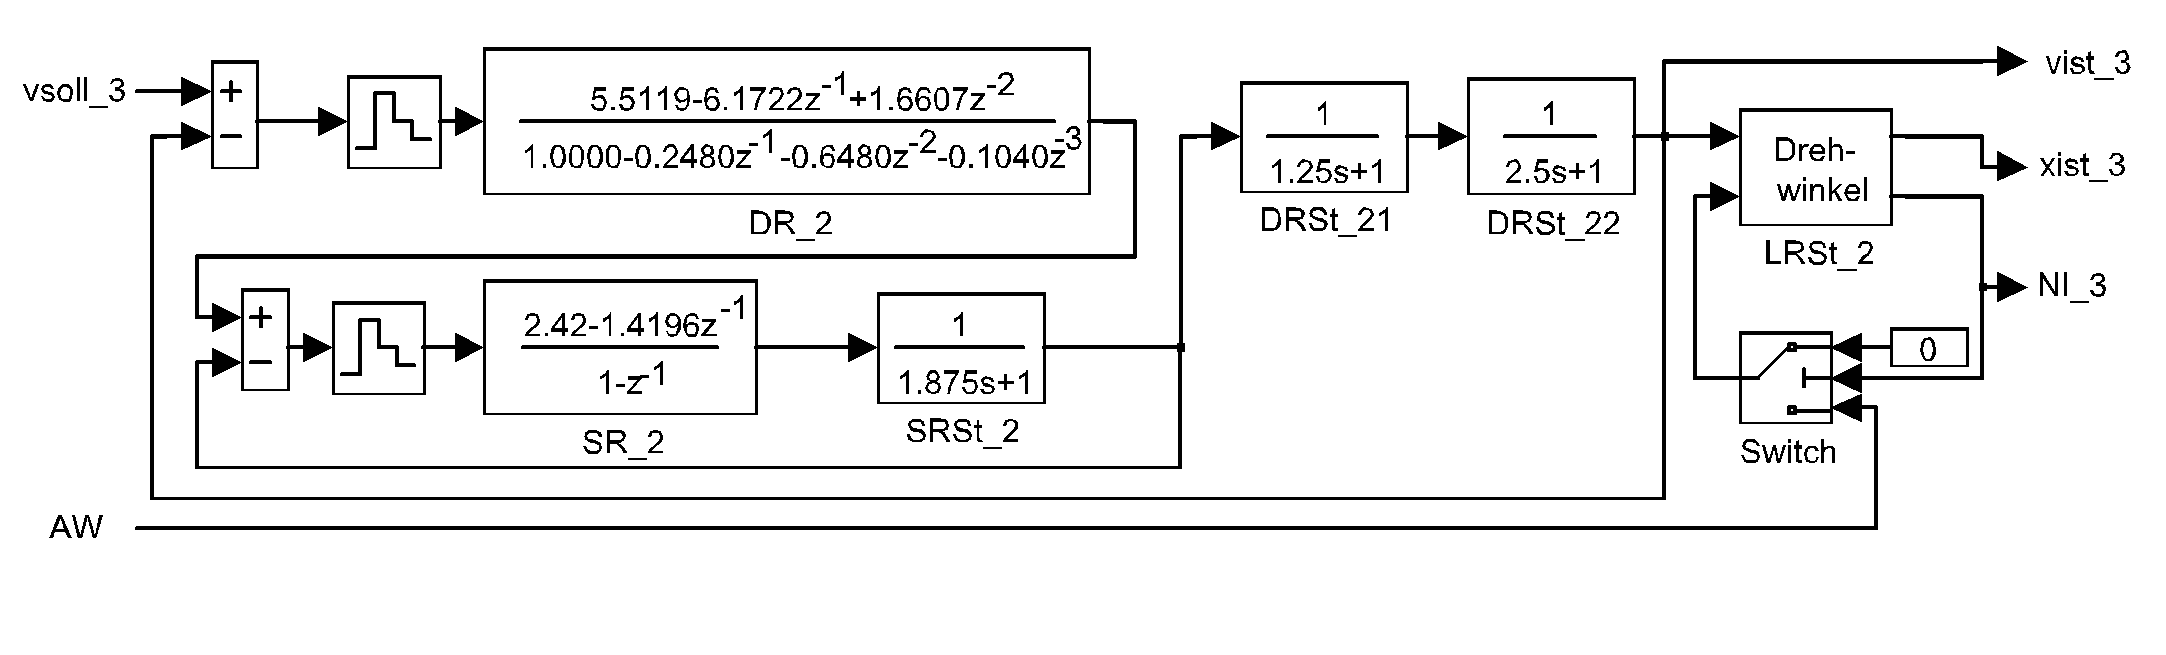 FUP example 9 - drive 3